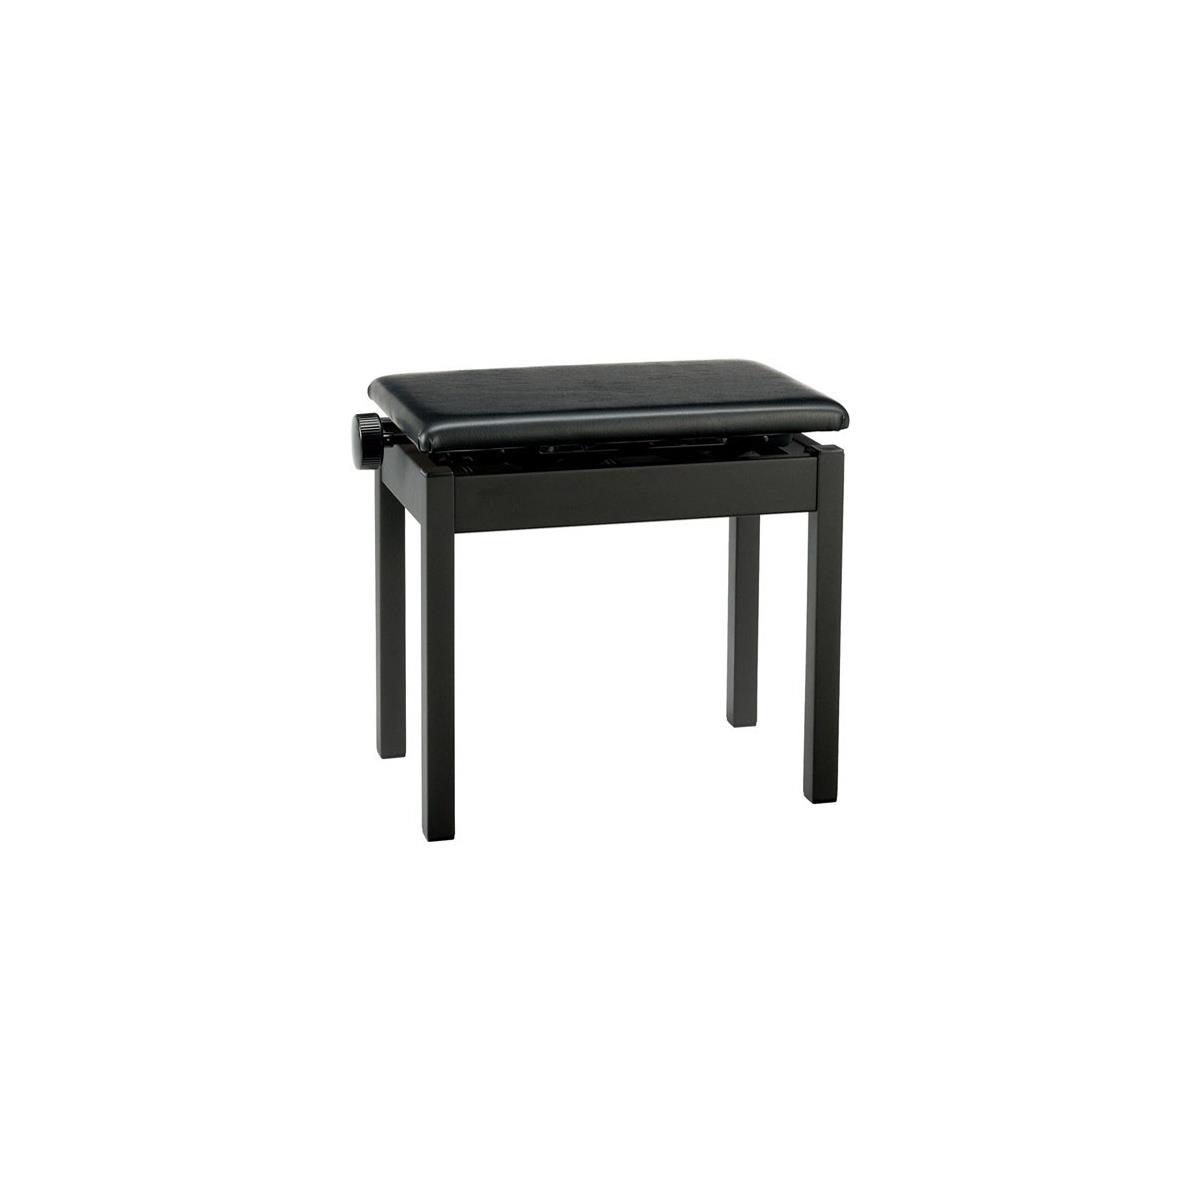 Image of Roland BNC-05 Adjustable Piano Bench for LX